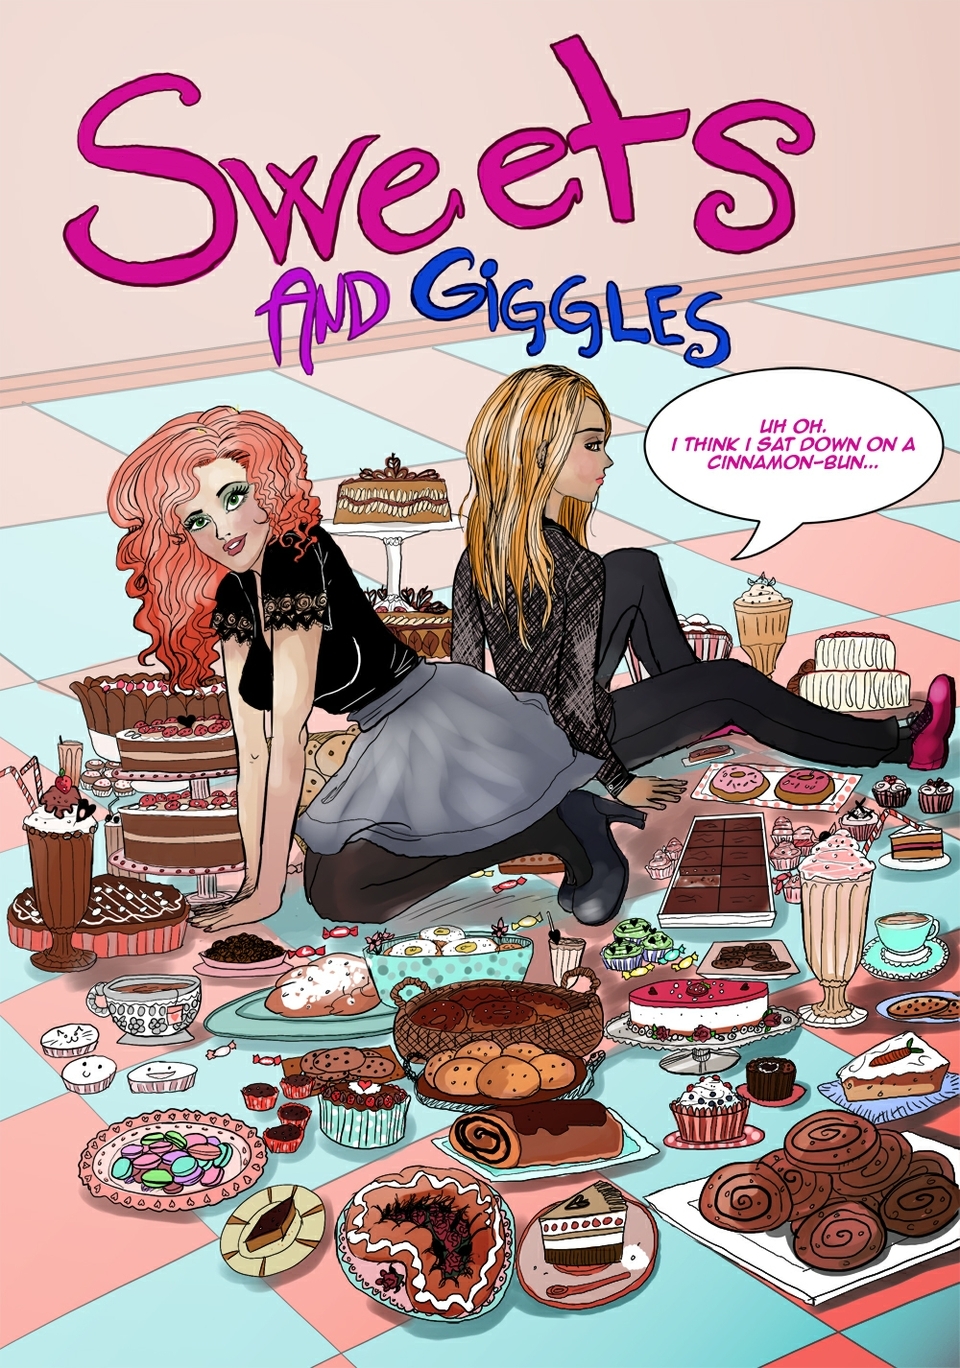 Cover part 1: Sweets and Giggles